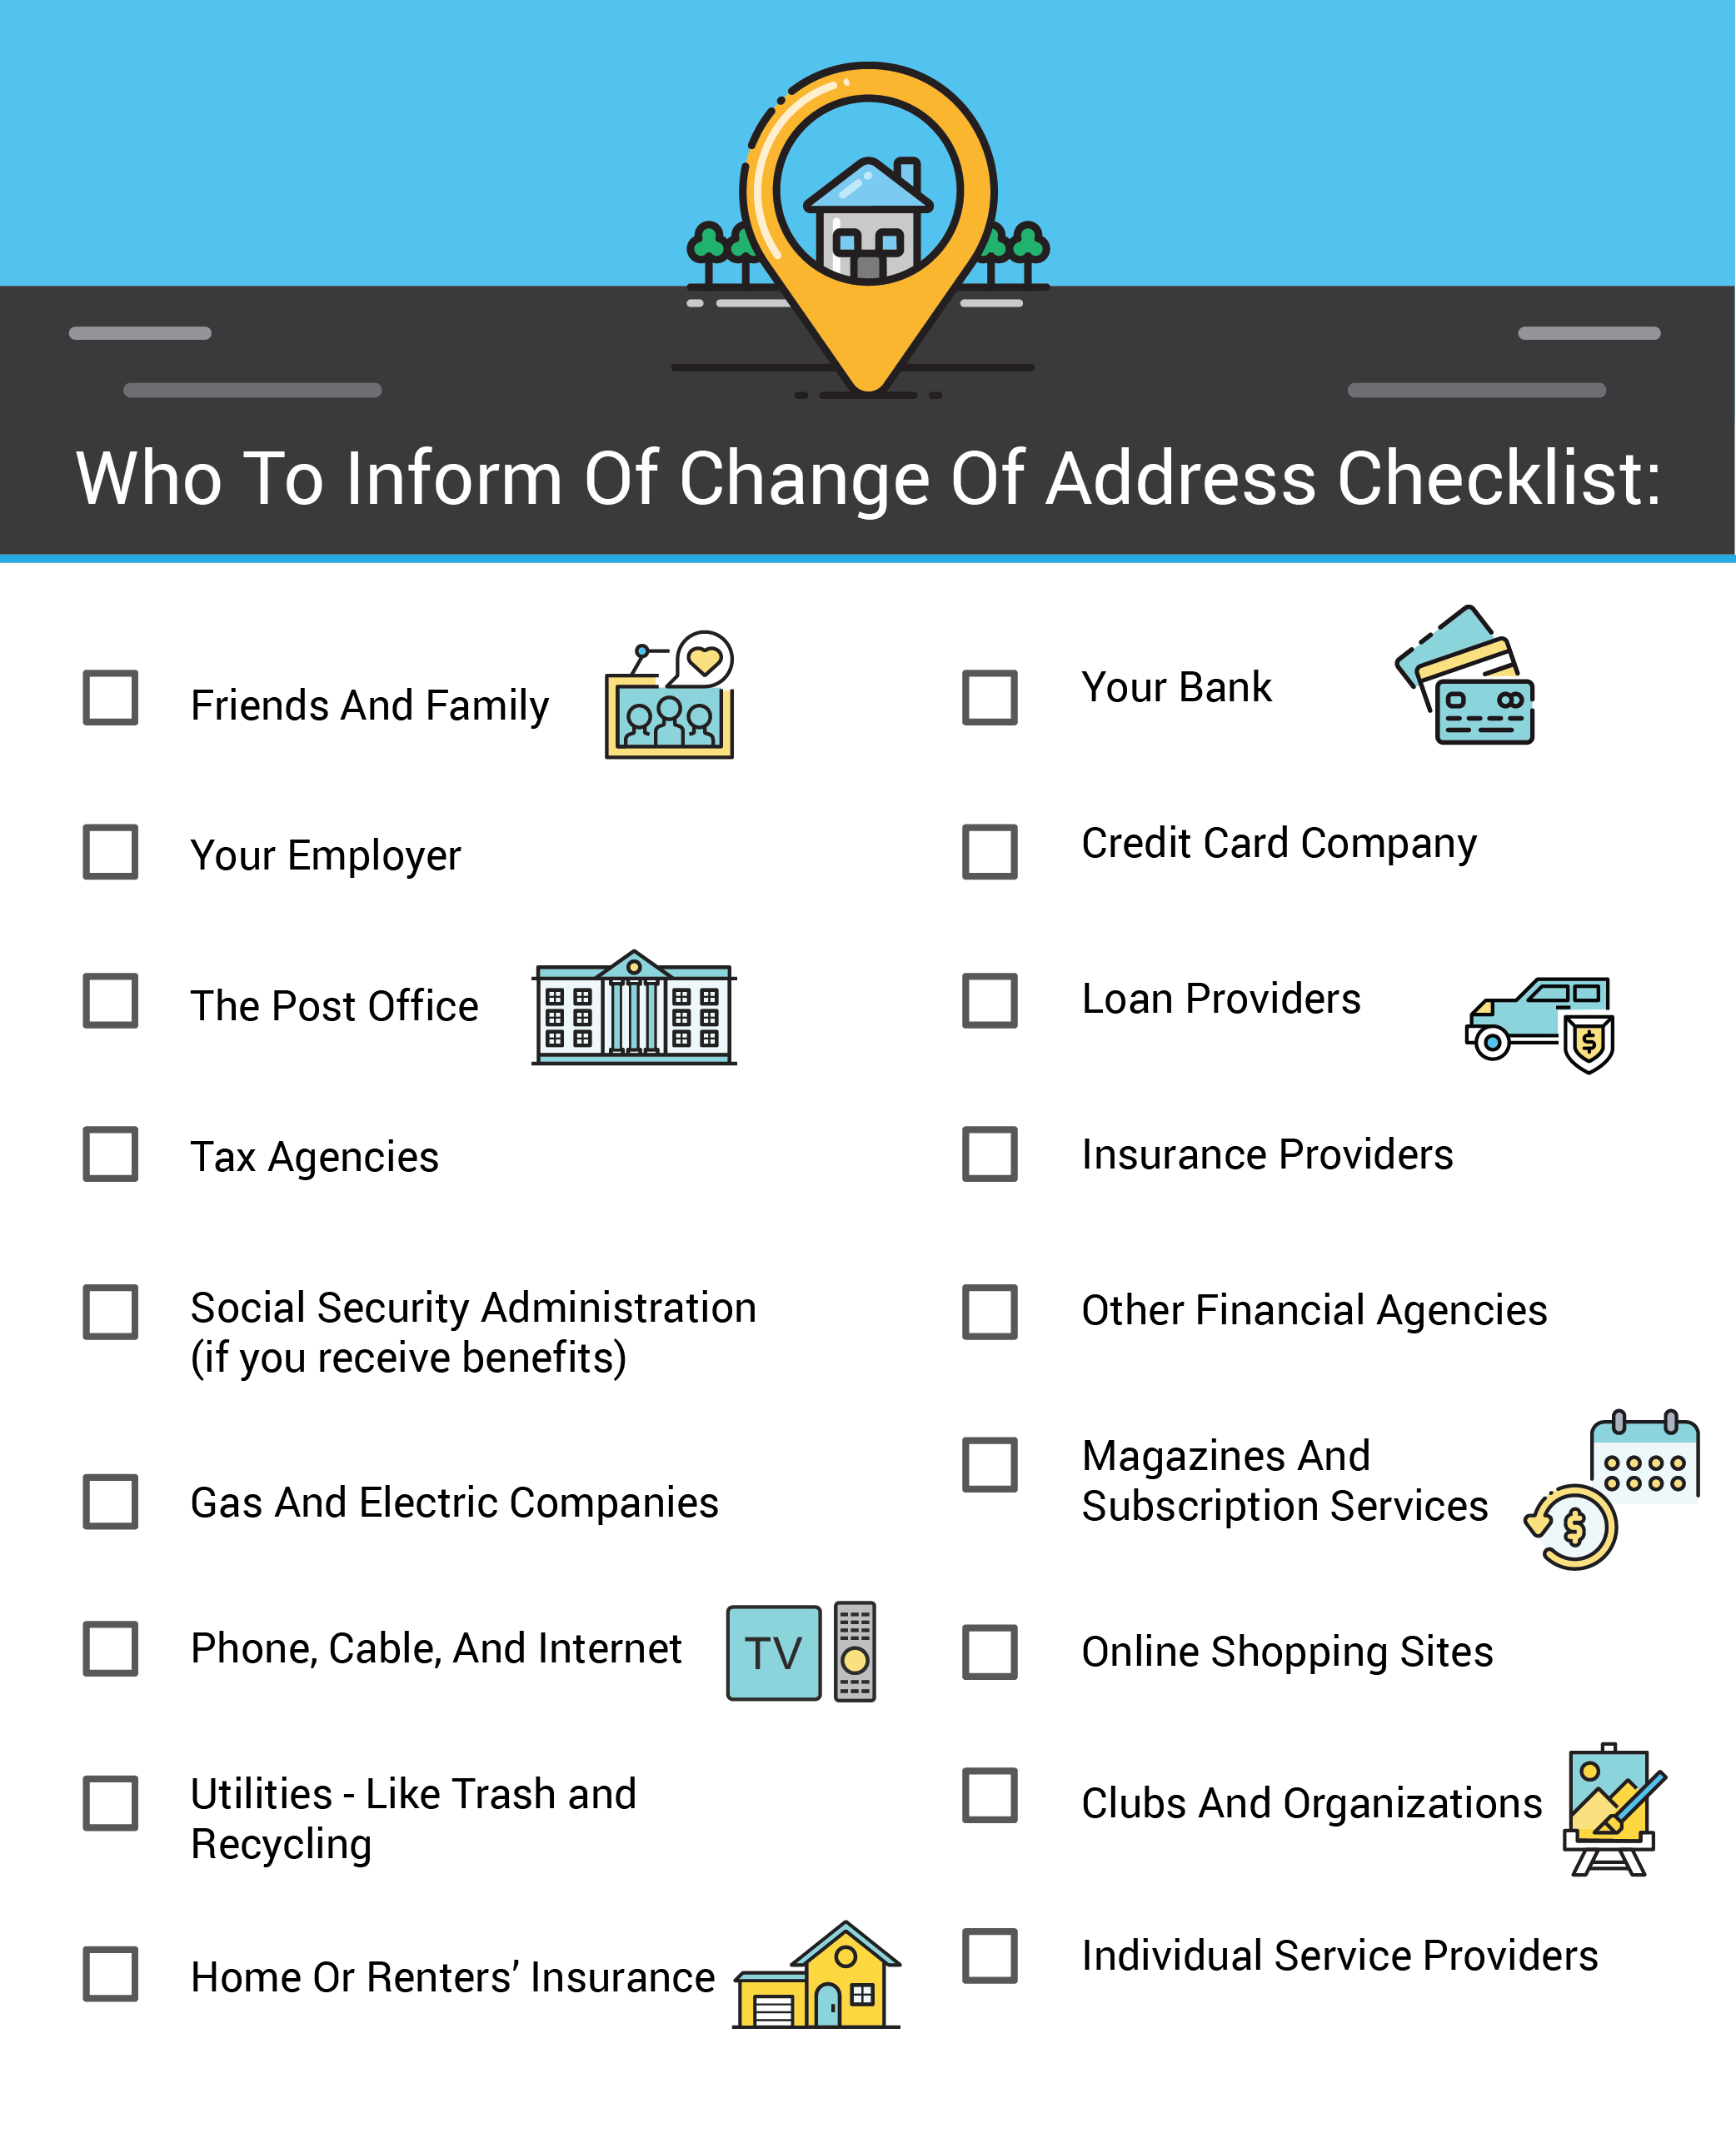 Who to inform of change of address checklist